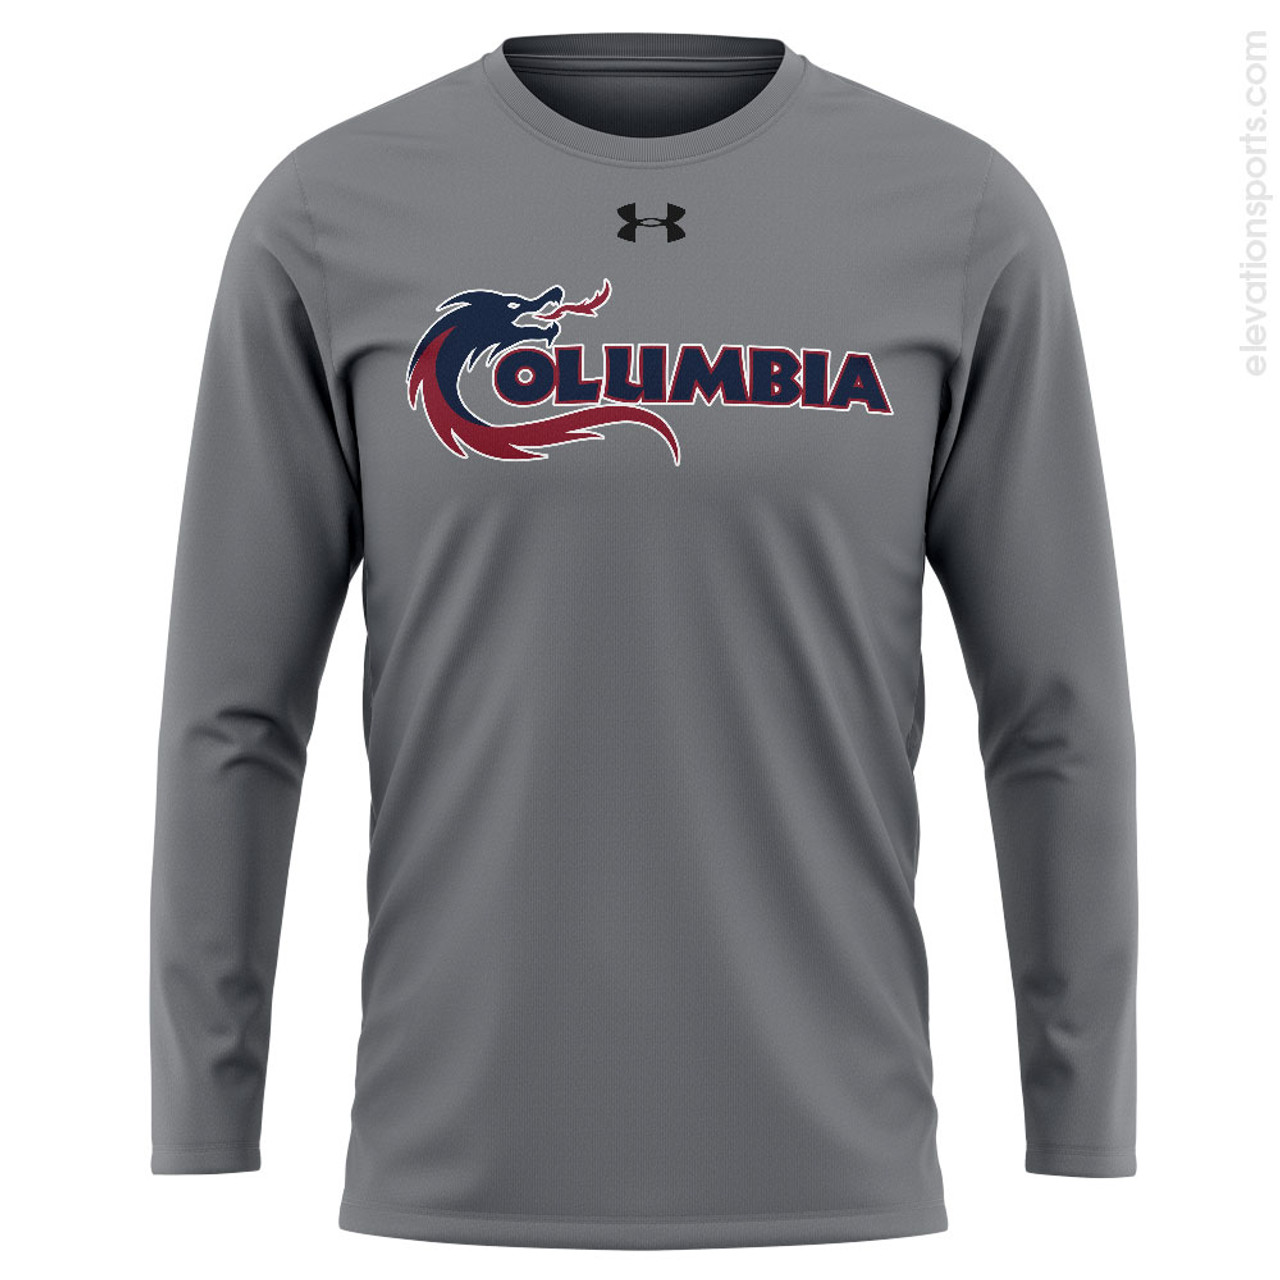 Custom Under Armour Shirts – Design Your Own T-Shirts